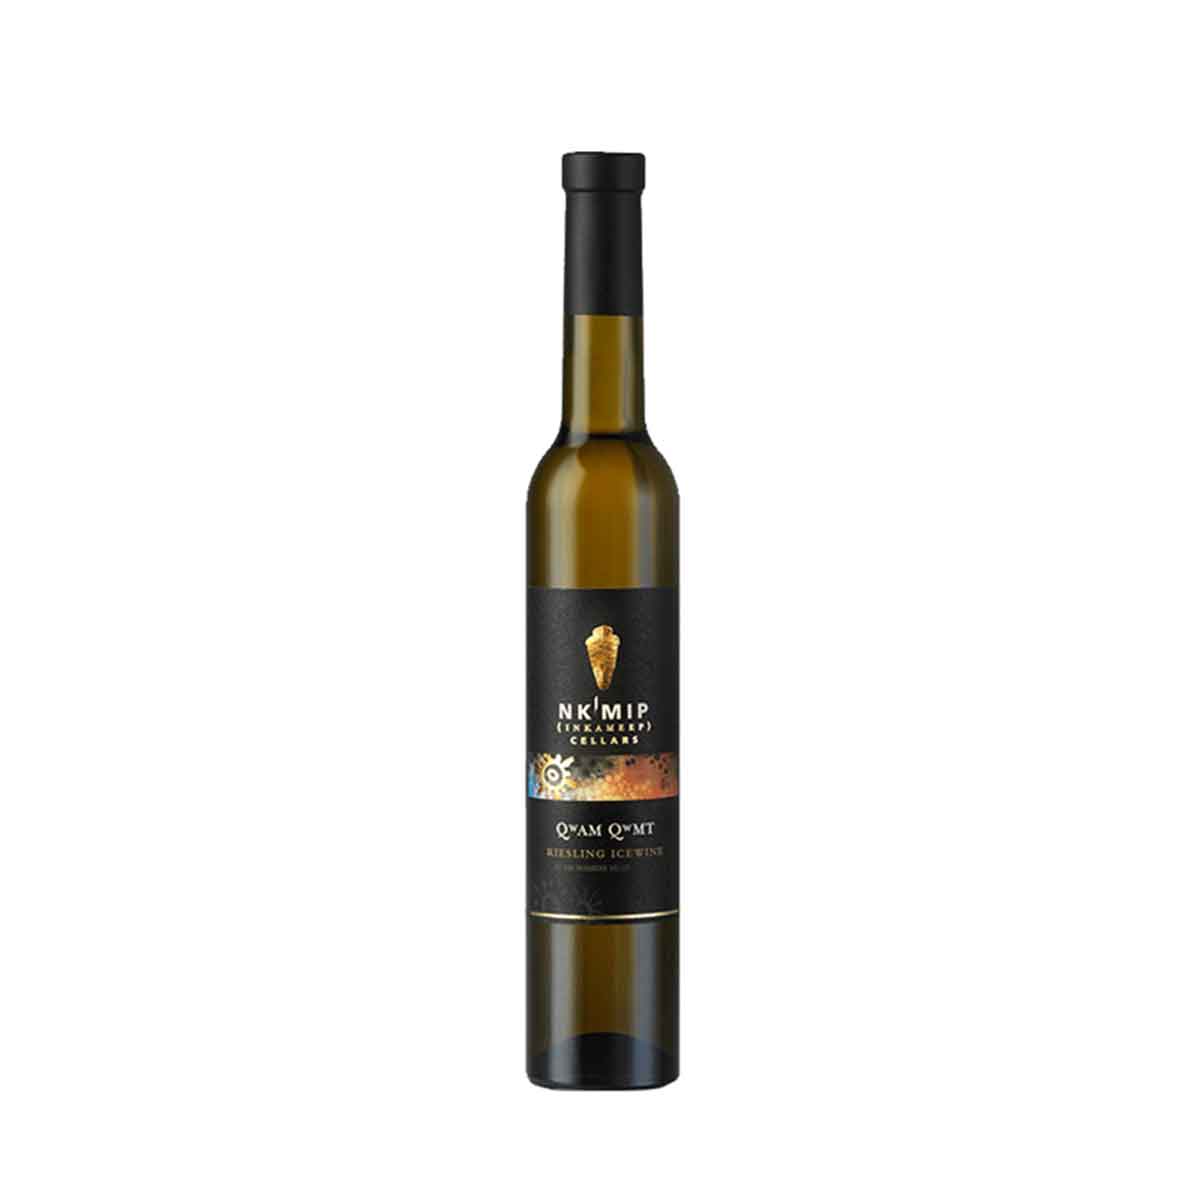 TAG Liquor Stores BC-Nk'mip Riesling Icewine 375ml